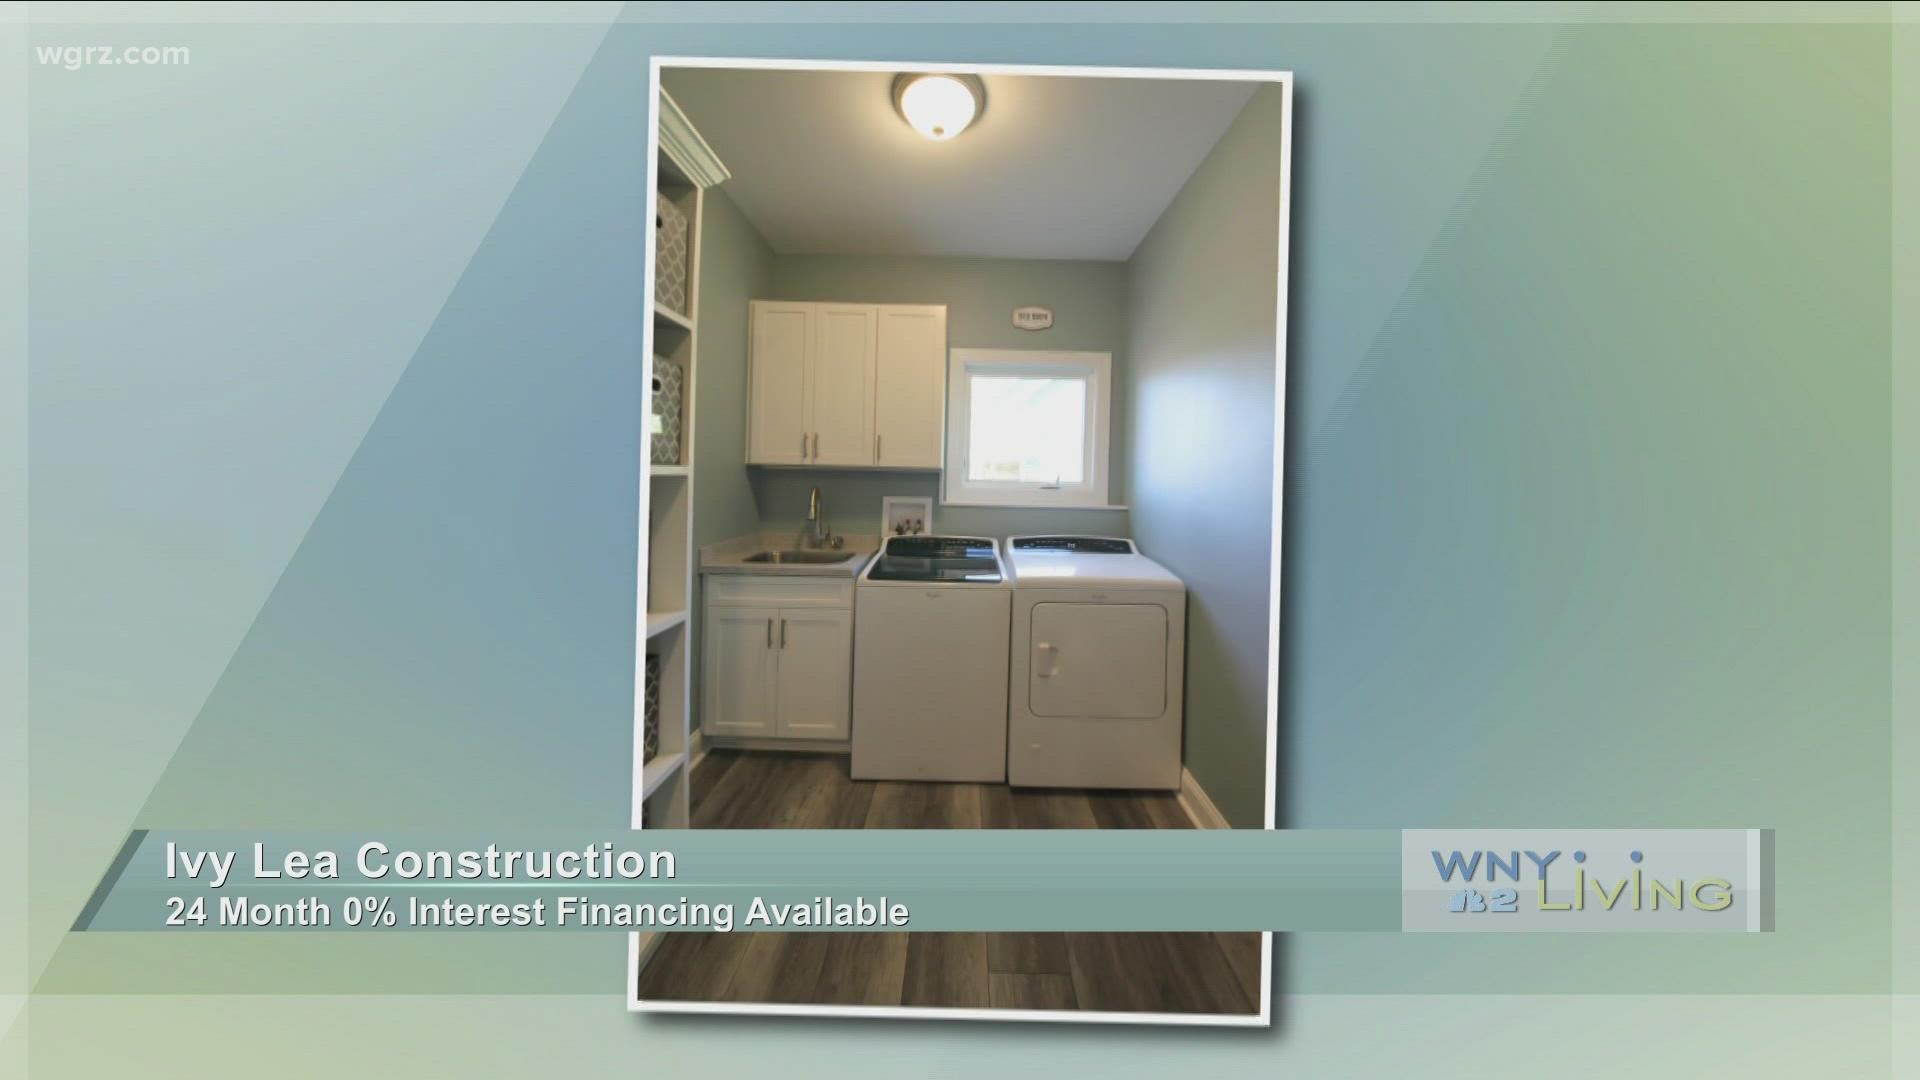 WNY Living - December 4 - Ivy Lea Construction (THIS VIDEO IS SPONSORED BY IVY LEA CONSTRUCTION)